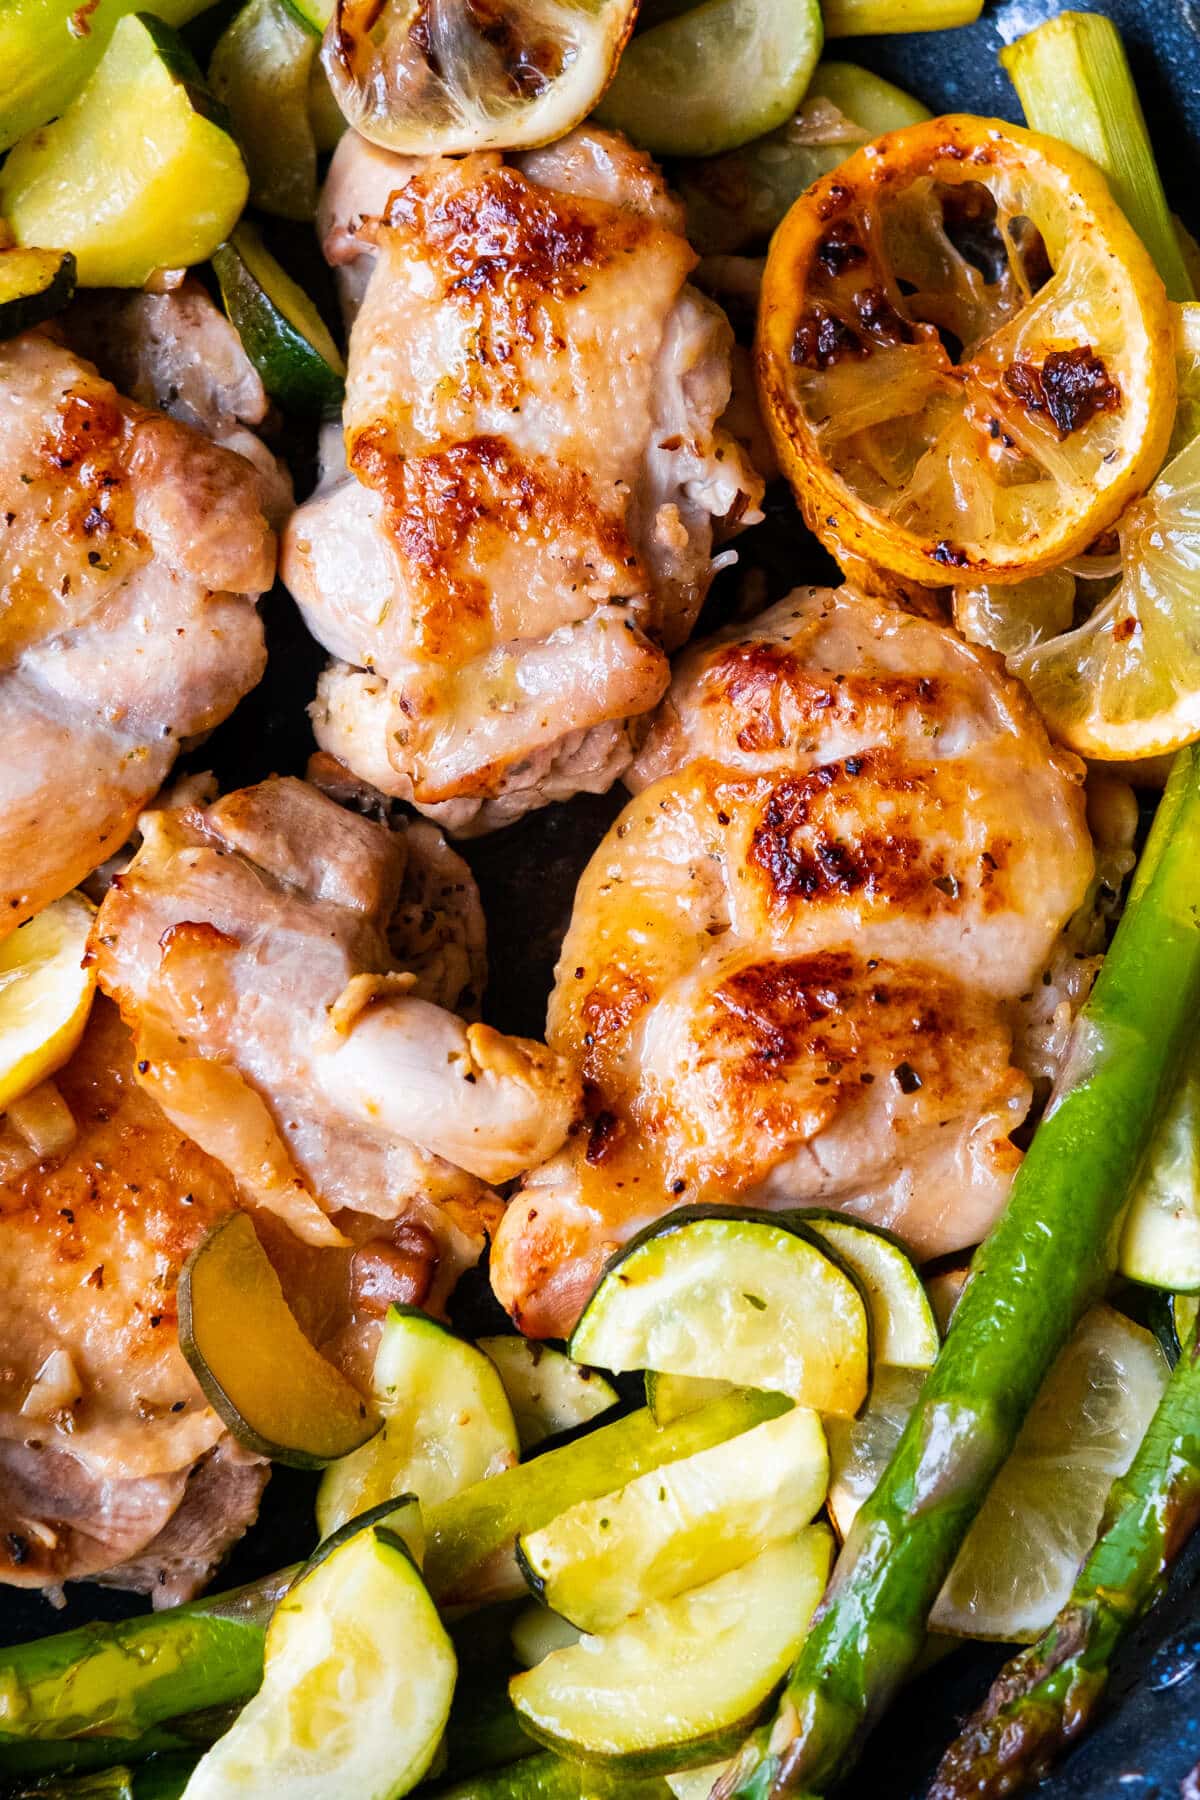 Golden brown seared chicken thighs alongside asparagus, zucchini slices and lemon slices. 